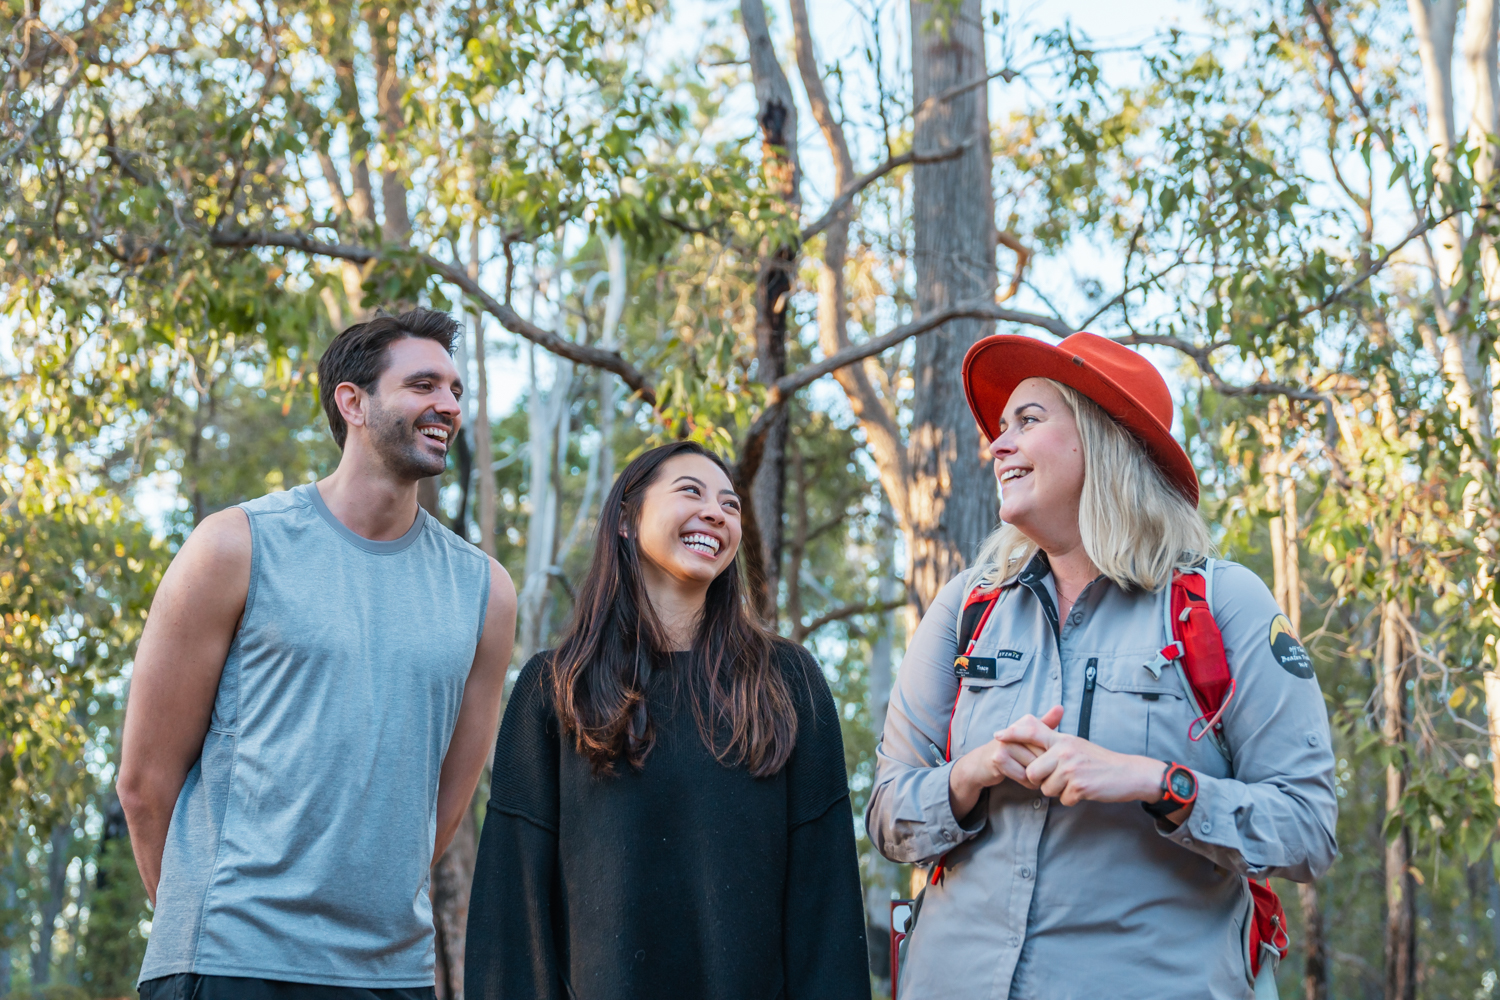 Shire of Murray launches ‘Winter Wanderers’ hiking series